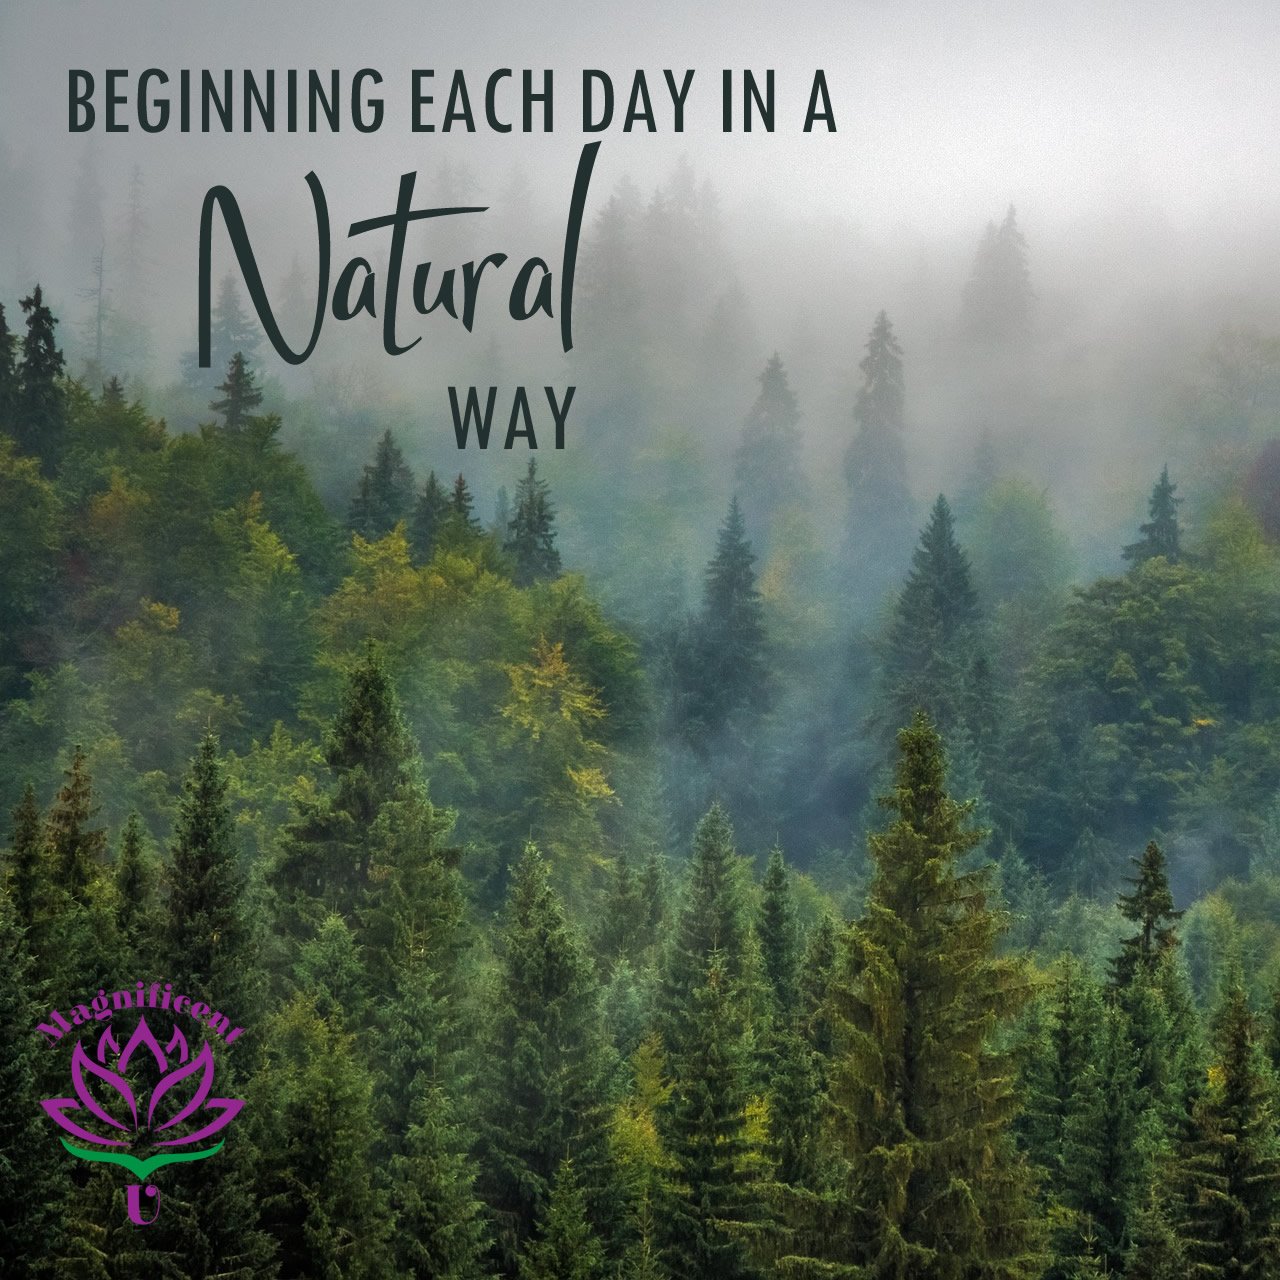 Beginning Each Day in a Natural Way to Improve Health and Reduce Stress